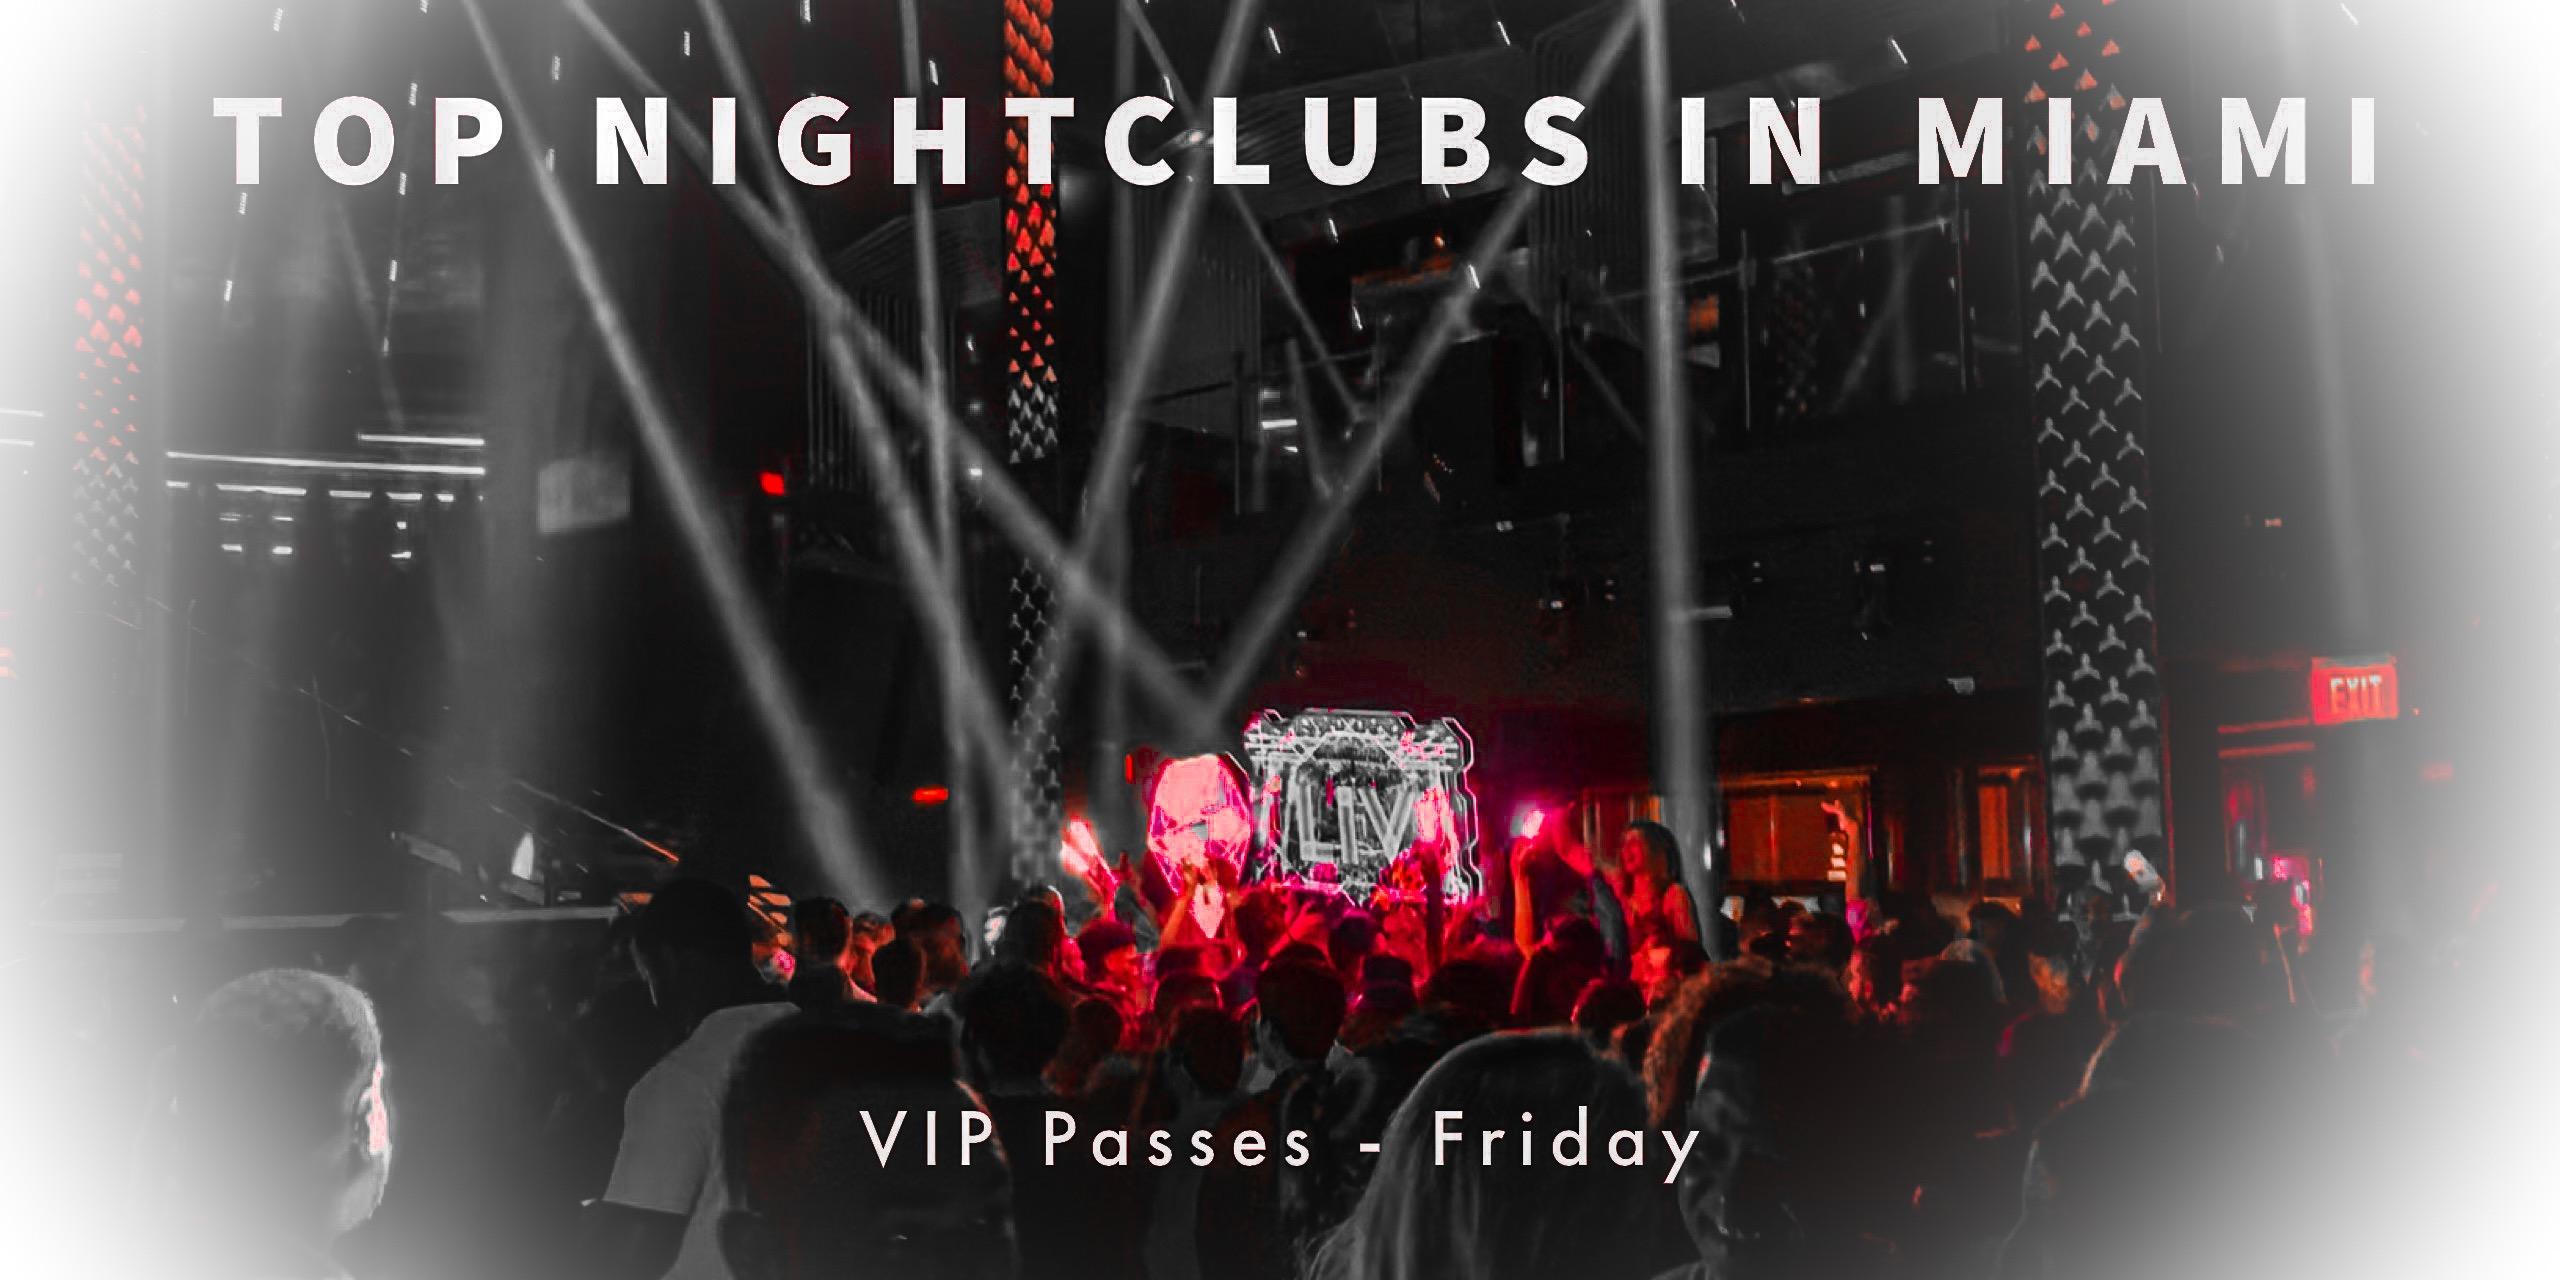 SPRING BREAK 2020 - ALL-INCLUSIVE VIP NIGHTCLUB PARTY PACKAGE DEAL TICKETS - MIAMI BEACH